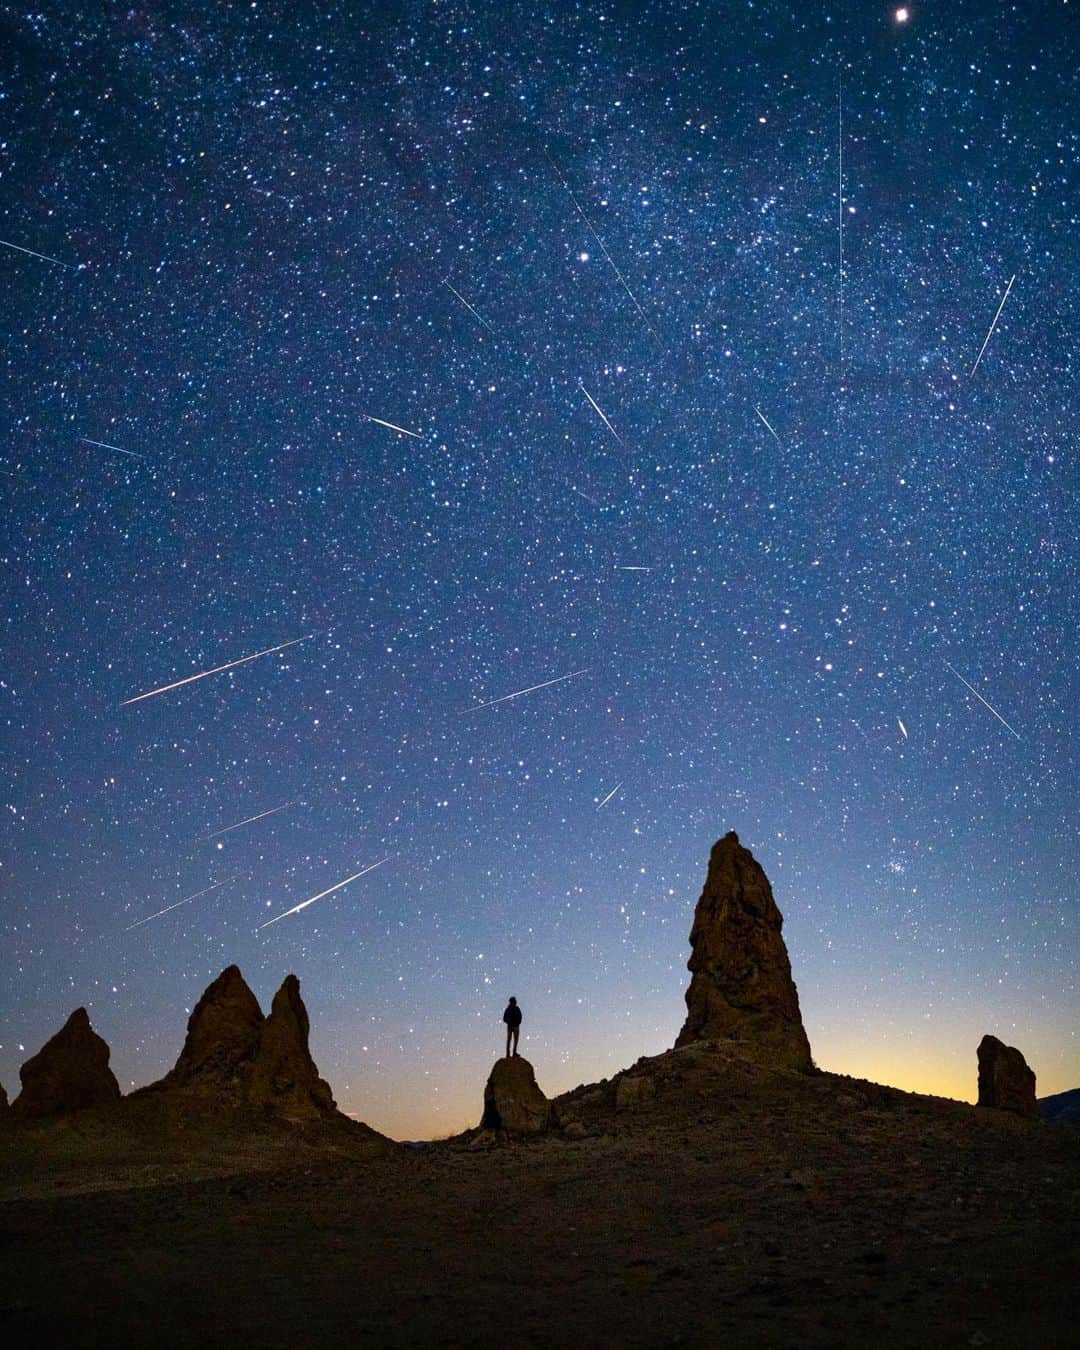 Travis Burkeのインスタグラム：「Last night’s Geminid Meteor Shower! I saw some of the most prominent shooting stars of my life. Unfortunately, most of them were out of frame since the camera only sees such a small portion of the night sky, or they would streak across the sky seemingly perfectly timed for when I wasn’t taking a photo haha. Either way, it was a blast to be out there and reinvigorating to try something new.  This is a composite merging multiple photos through the night before the moon came up and made it too bright for viewing. I specifically wanted to capture the radiant point for this shower, the Gemini constellation, which is the celestial point in which the meteors seem to originate.   All photos were taken on a tripod with the same camera settings and merged in Photoshop.  Camera Settings- 14mm, f/2.8, 20 sec, ISO 5000.   Images/adventures like these take a lot of work. If you enjoyed this, please leave a comment or share it with others who might be interested. Thanks so much for the support!   #geminidmeteorshower #geminids #nightphotography」